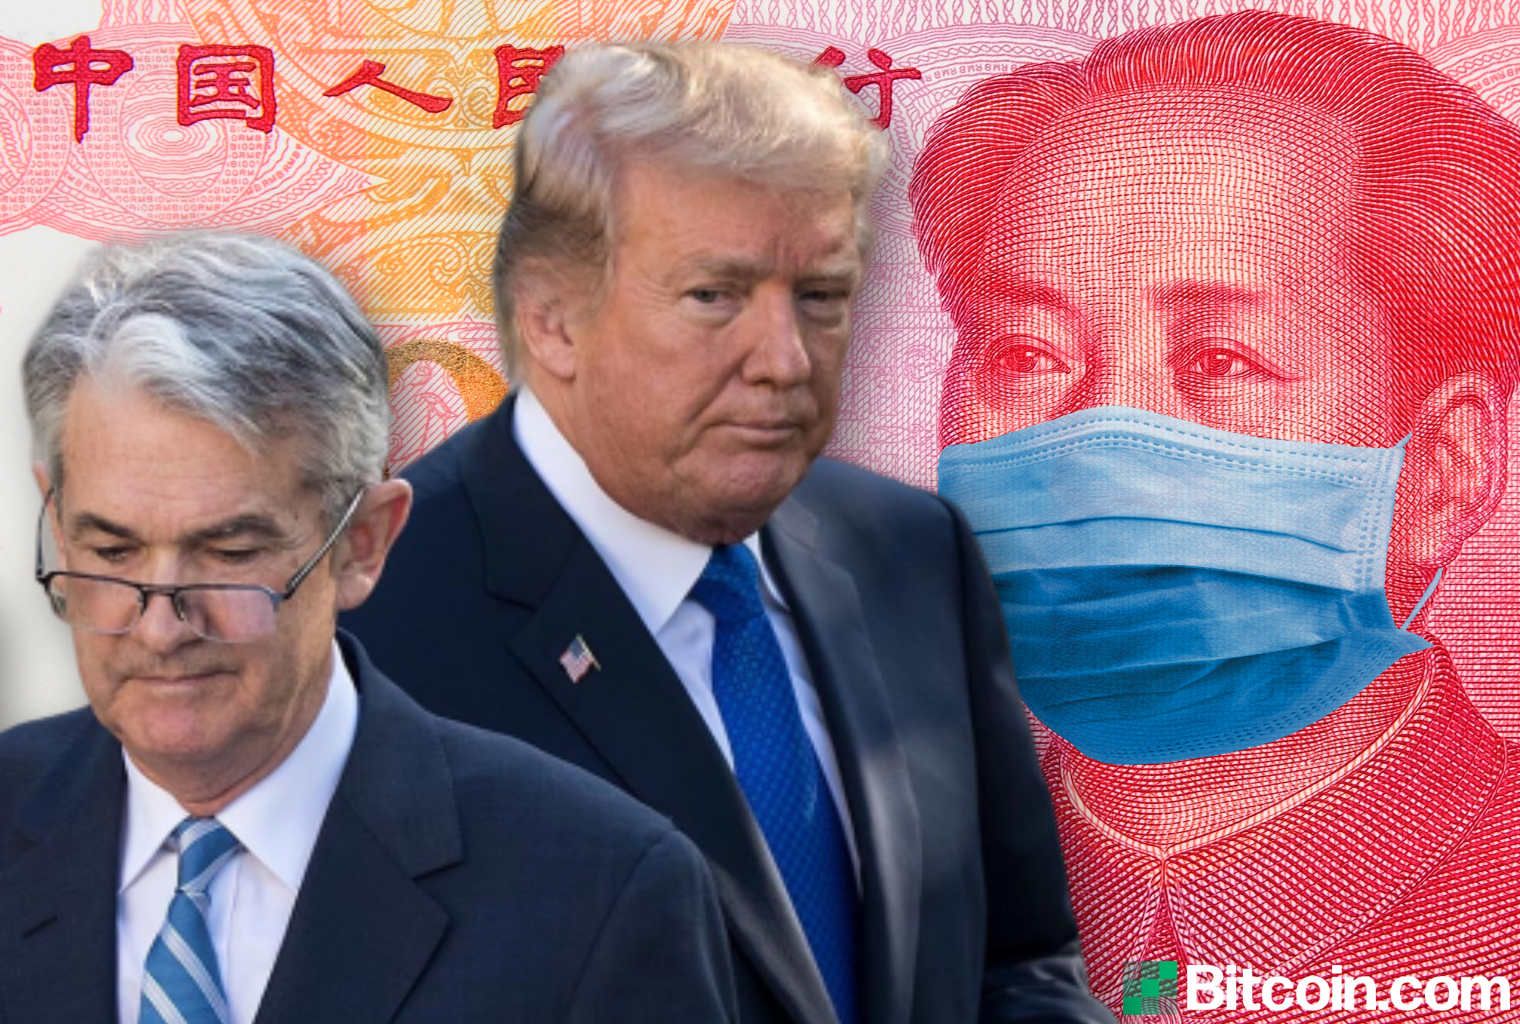 Regulatory Roundup: Trump's Cryptocurrency Proposals, IRS Changes Rule, China Quarantines Cash